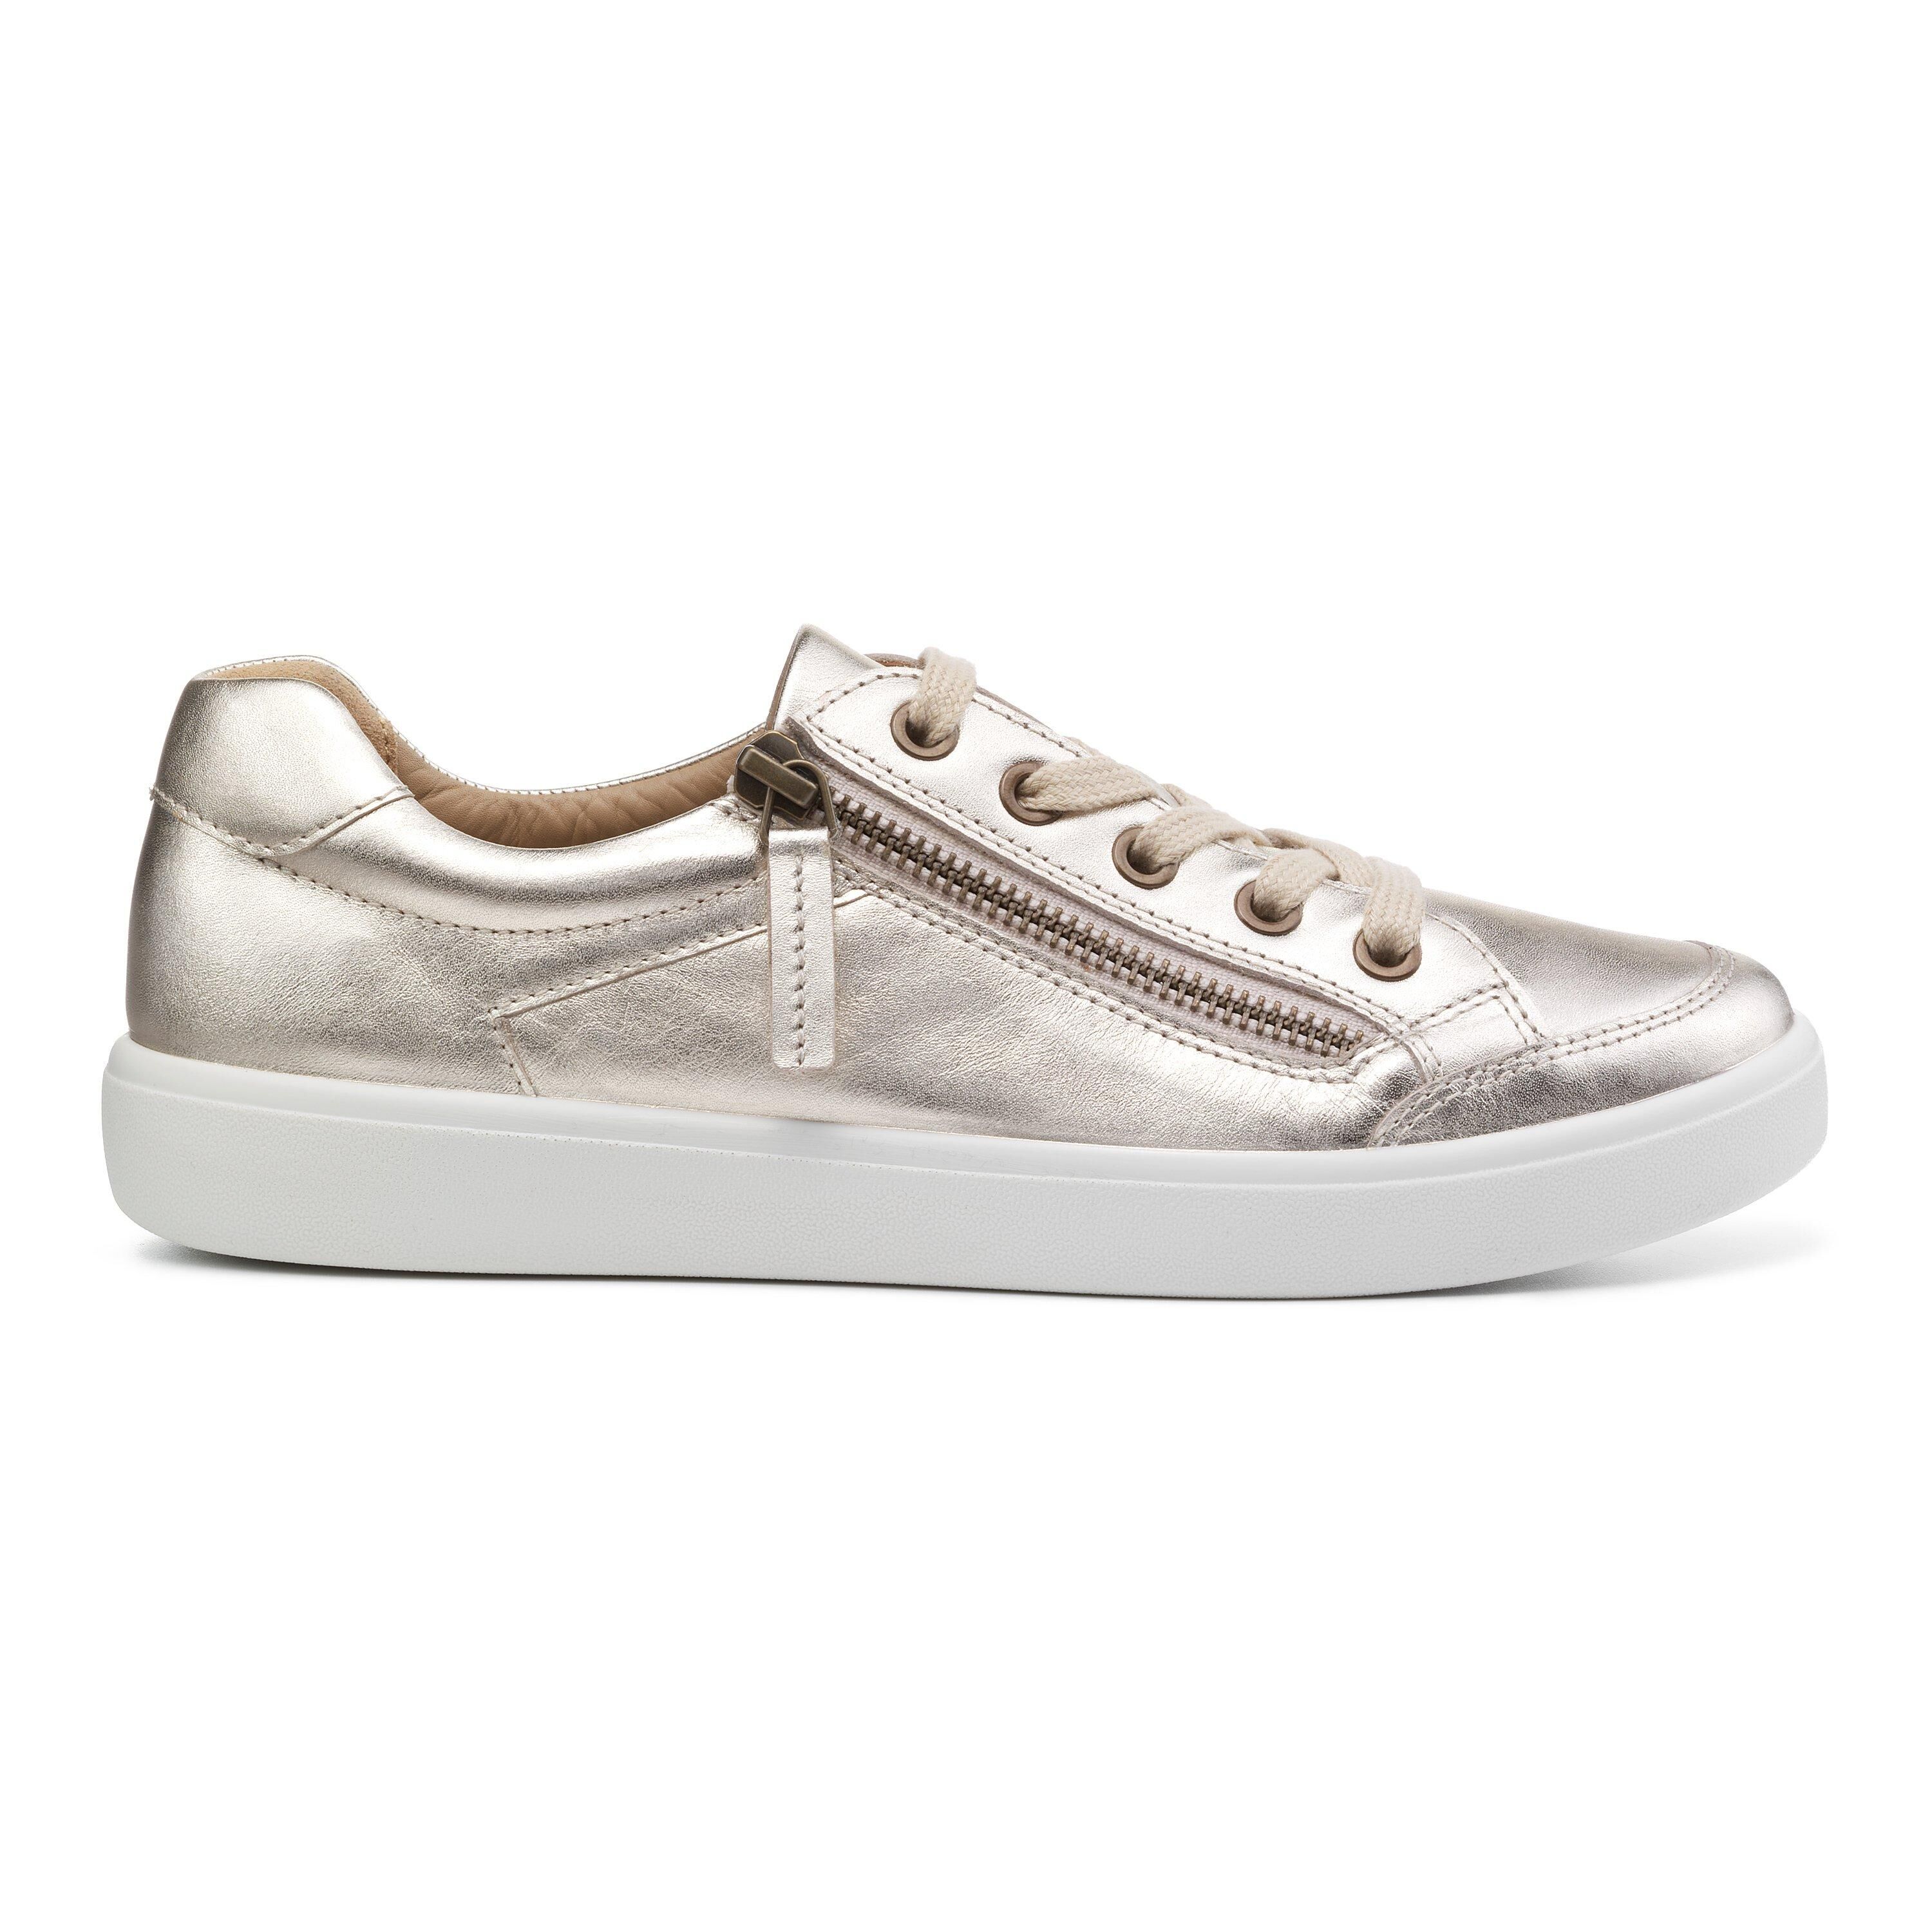 Hotter Chase II Shoes - Soft Gold Wide Fit 8 female